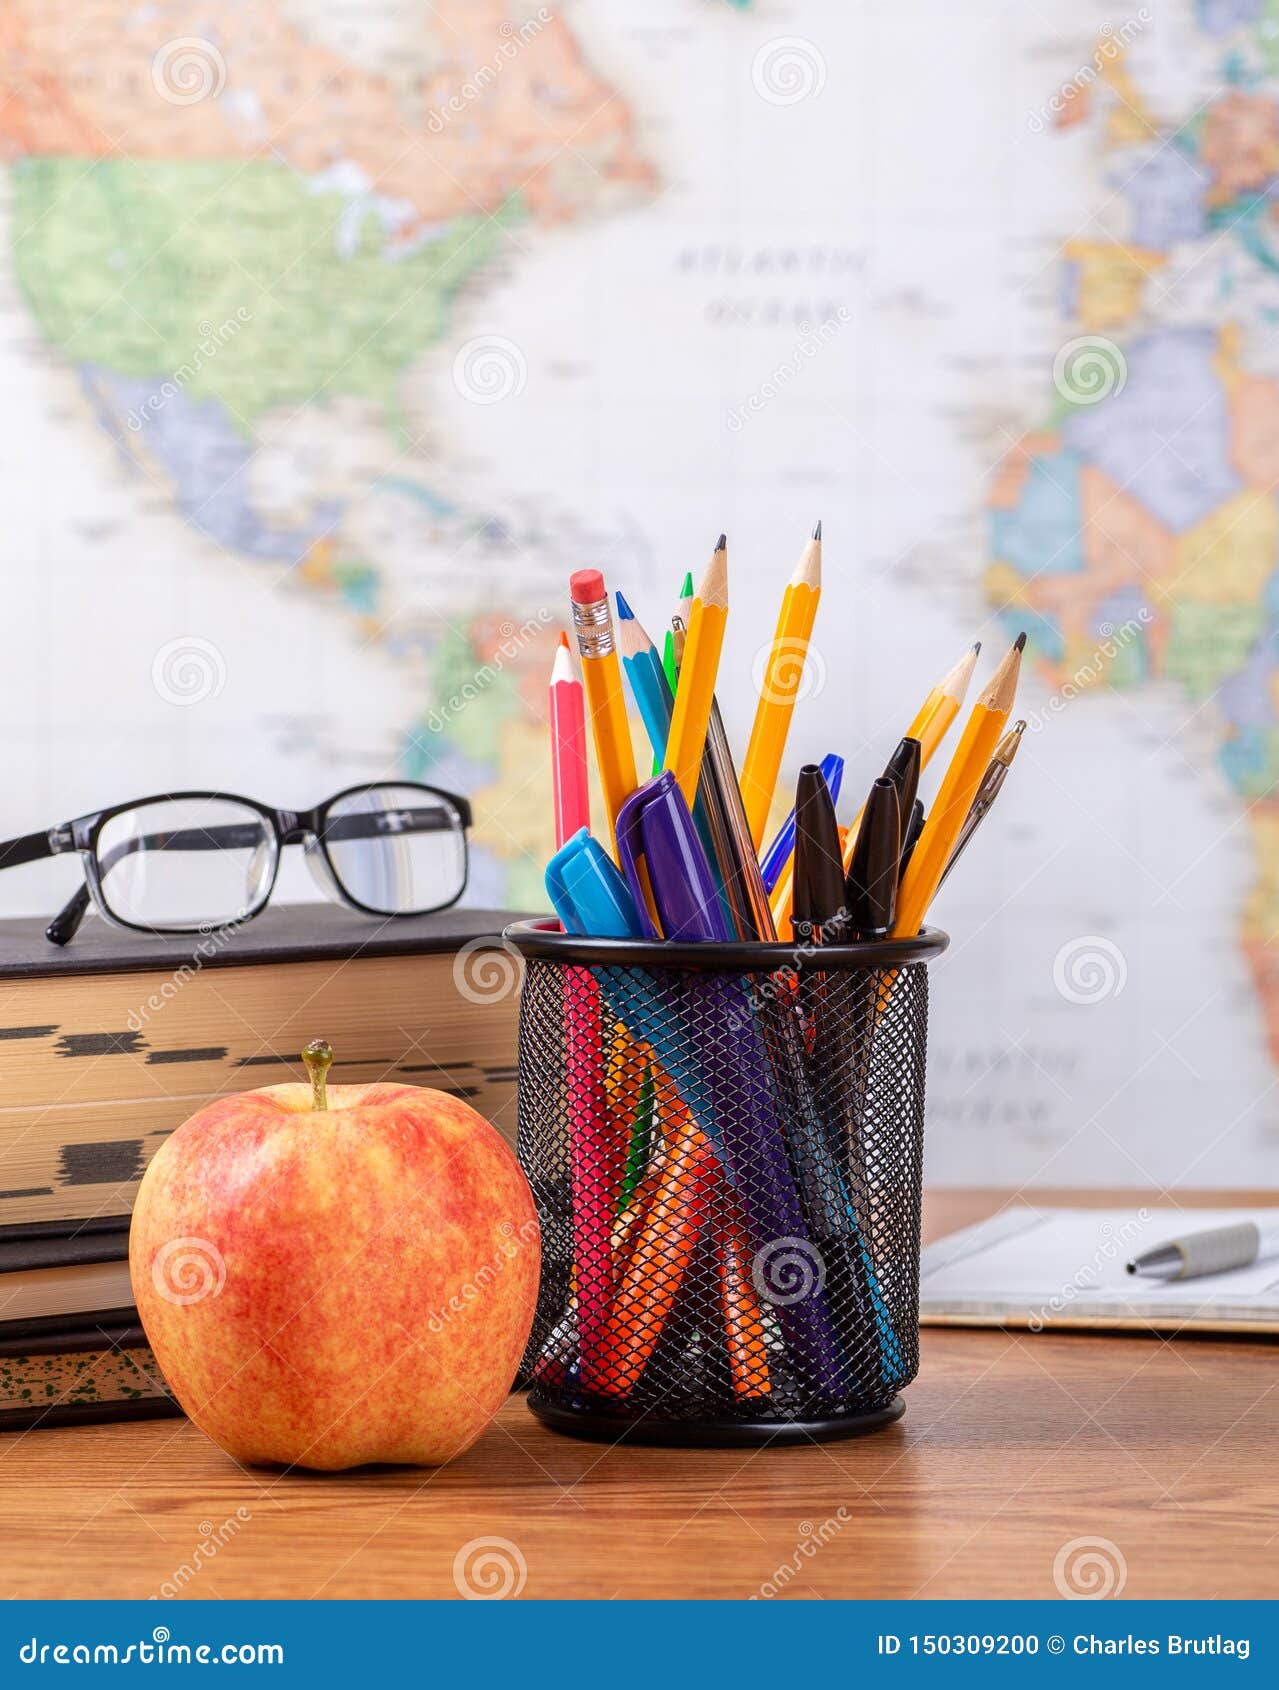 School Teachers Desk With World Map In Background Stock Photo